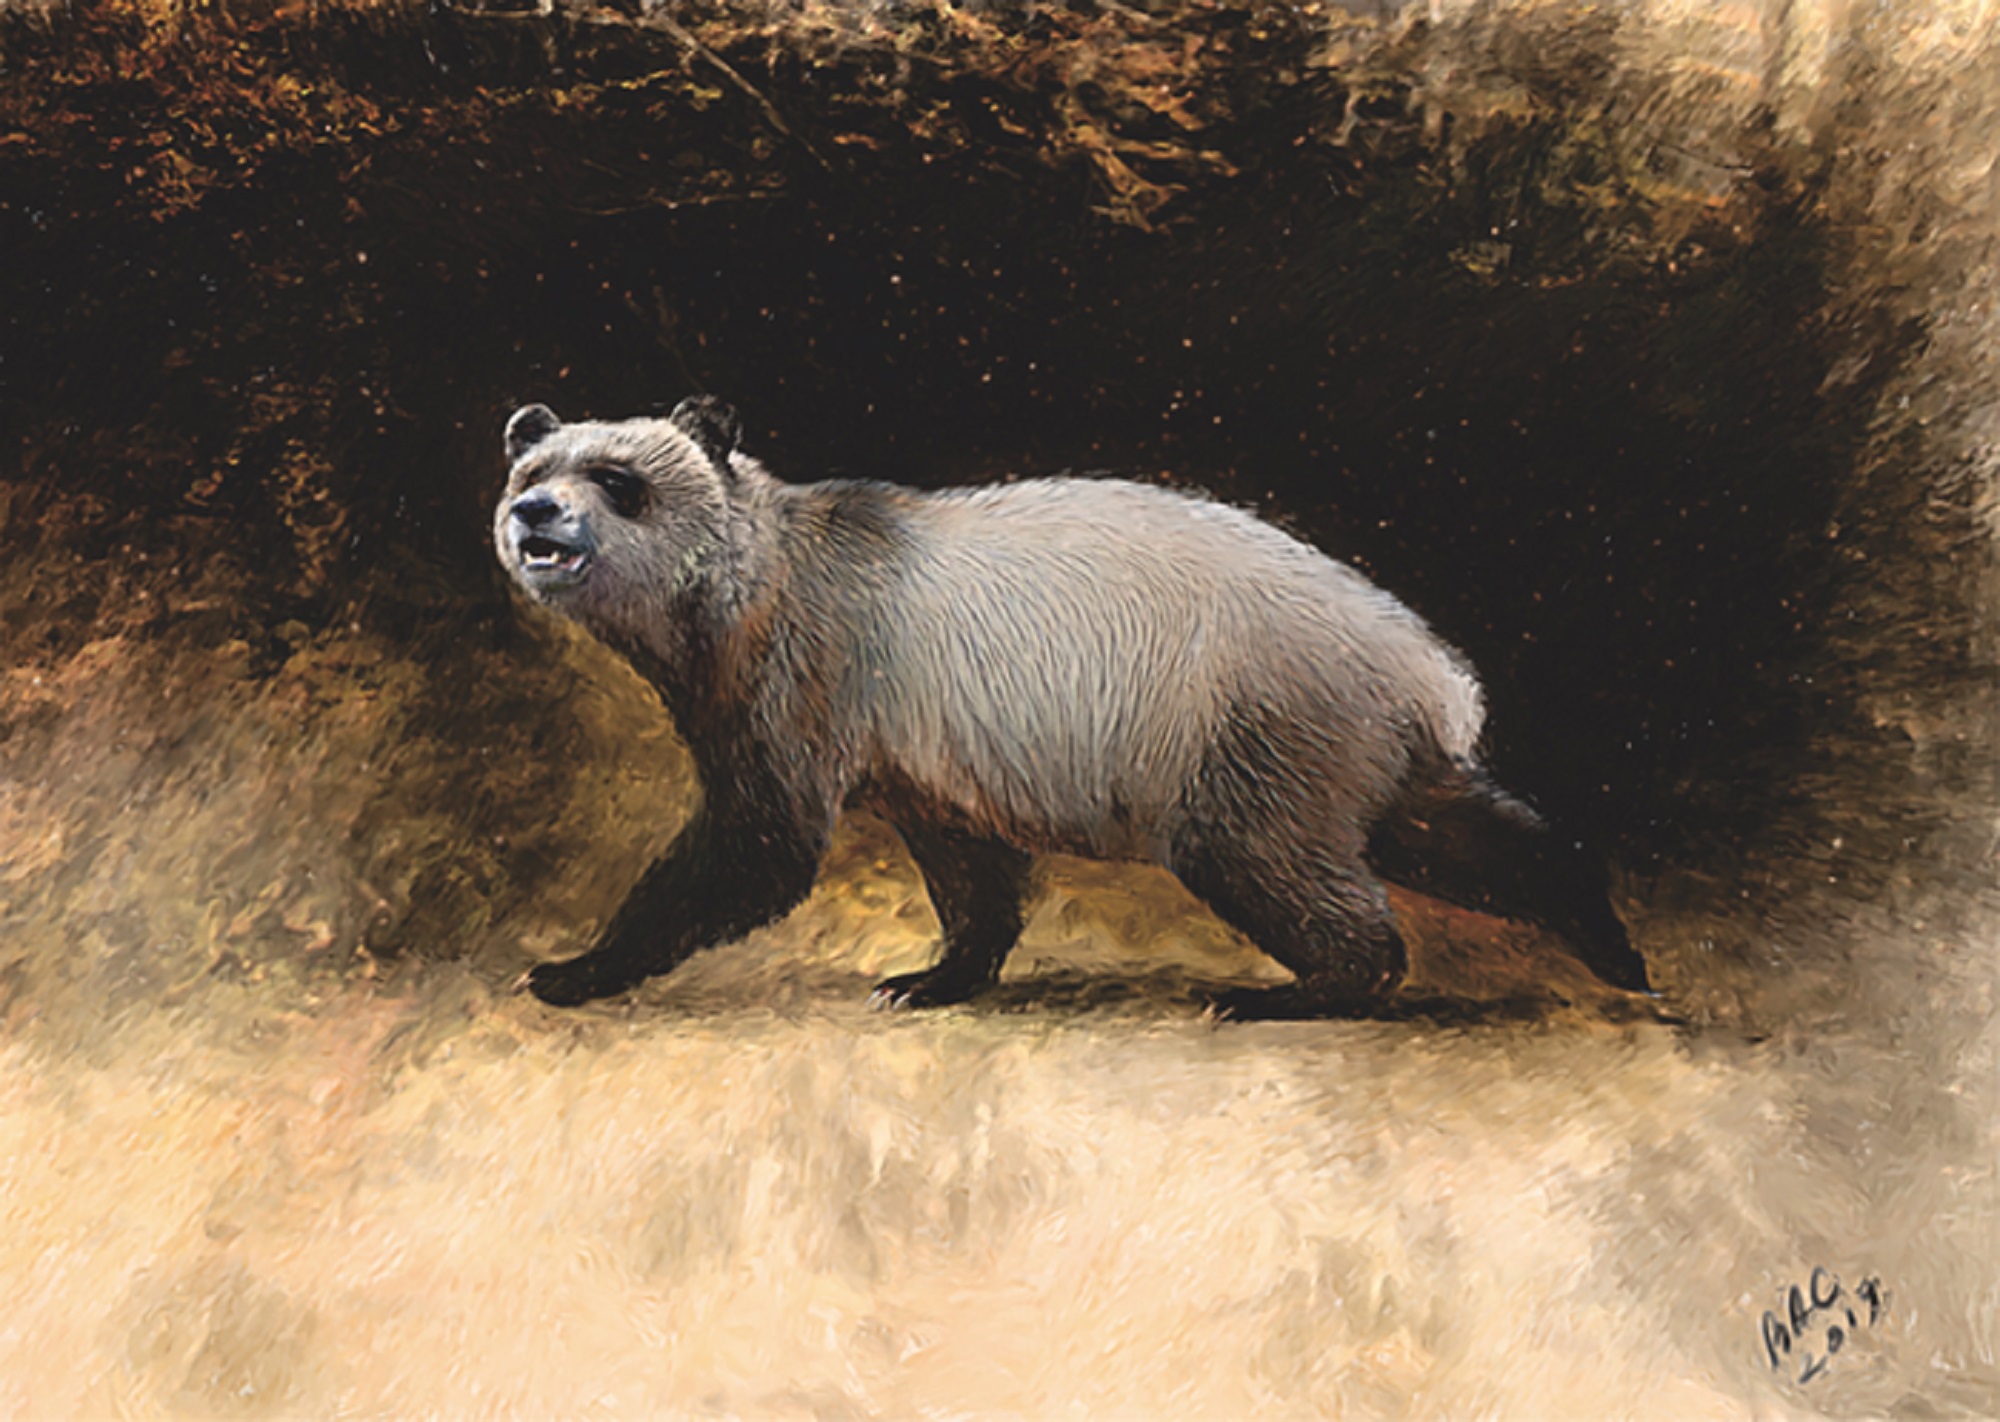 Small European panda from 6 million years ago in a painting